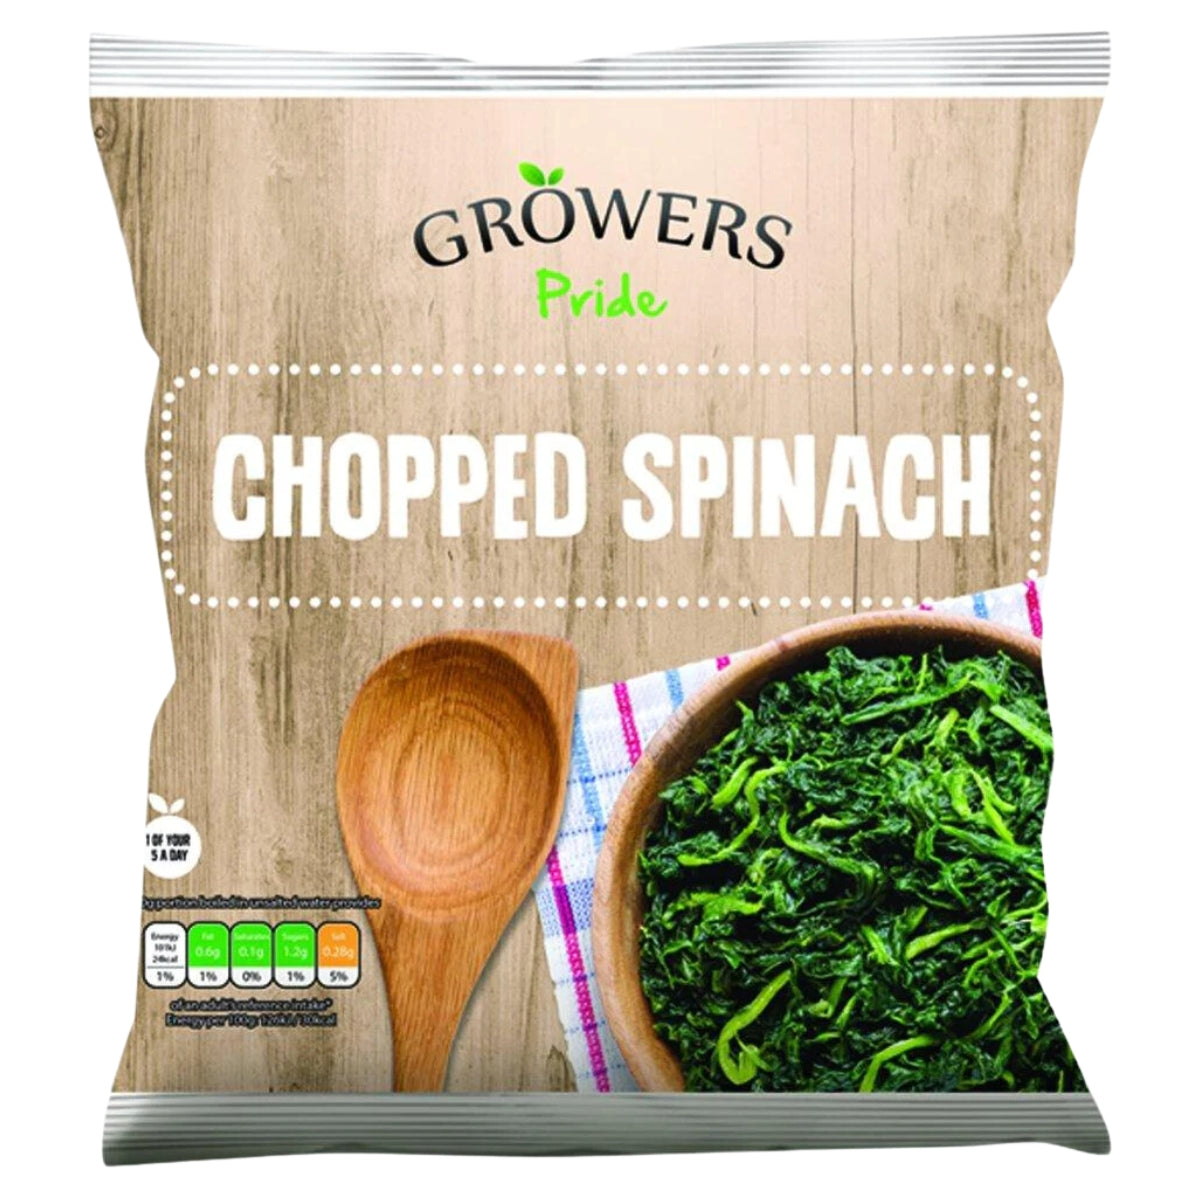 Growers Pride - Chopped Spinach - 450g chopped spinach.